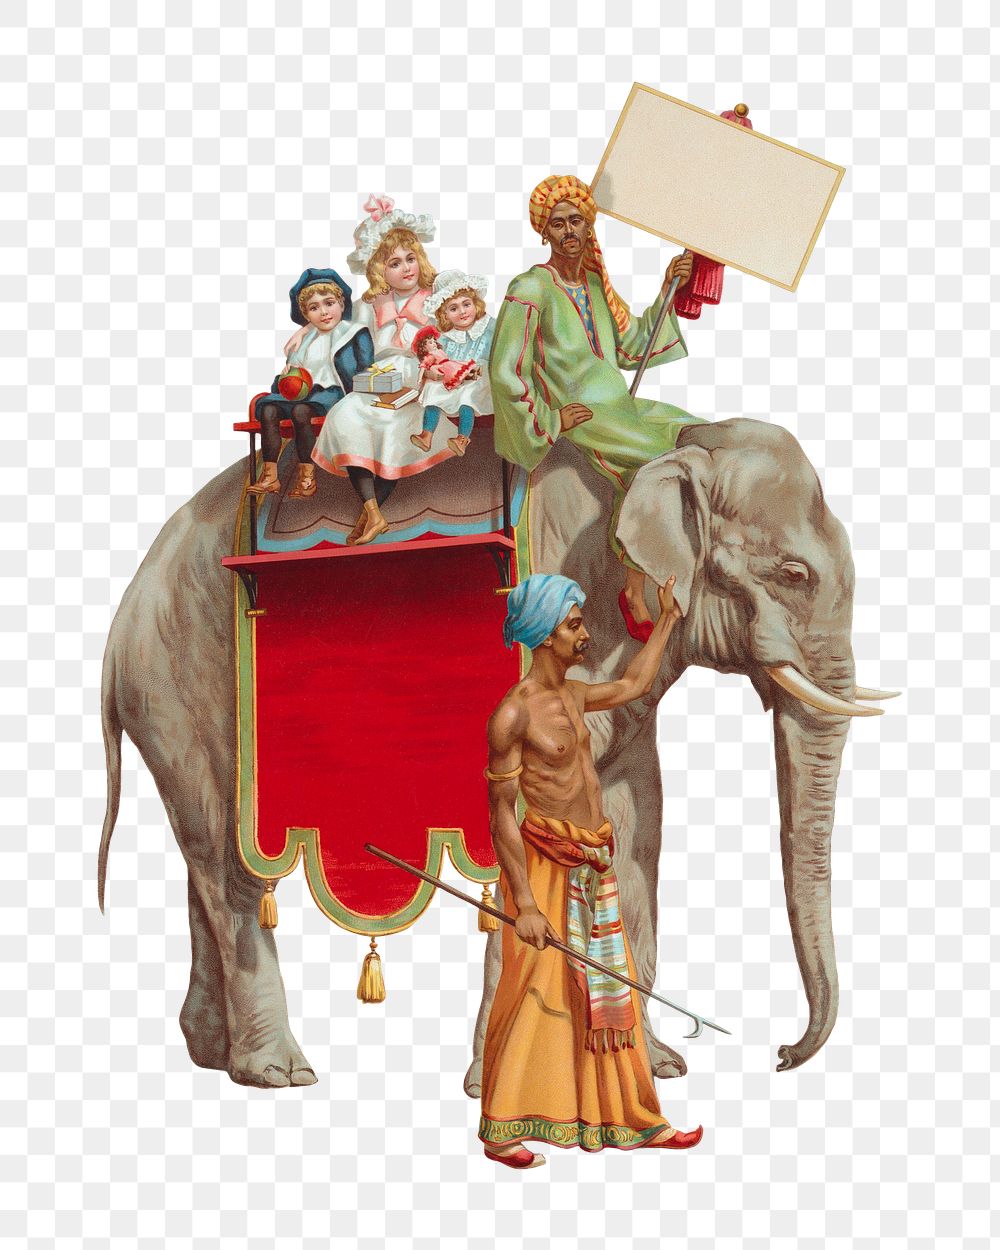 Elephant ride png vintage illustration, transparent background. Remixed by rawpixel. 